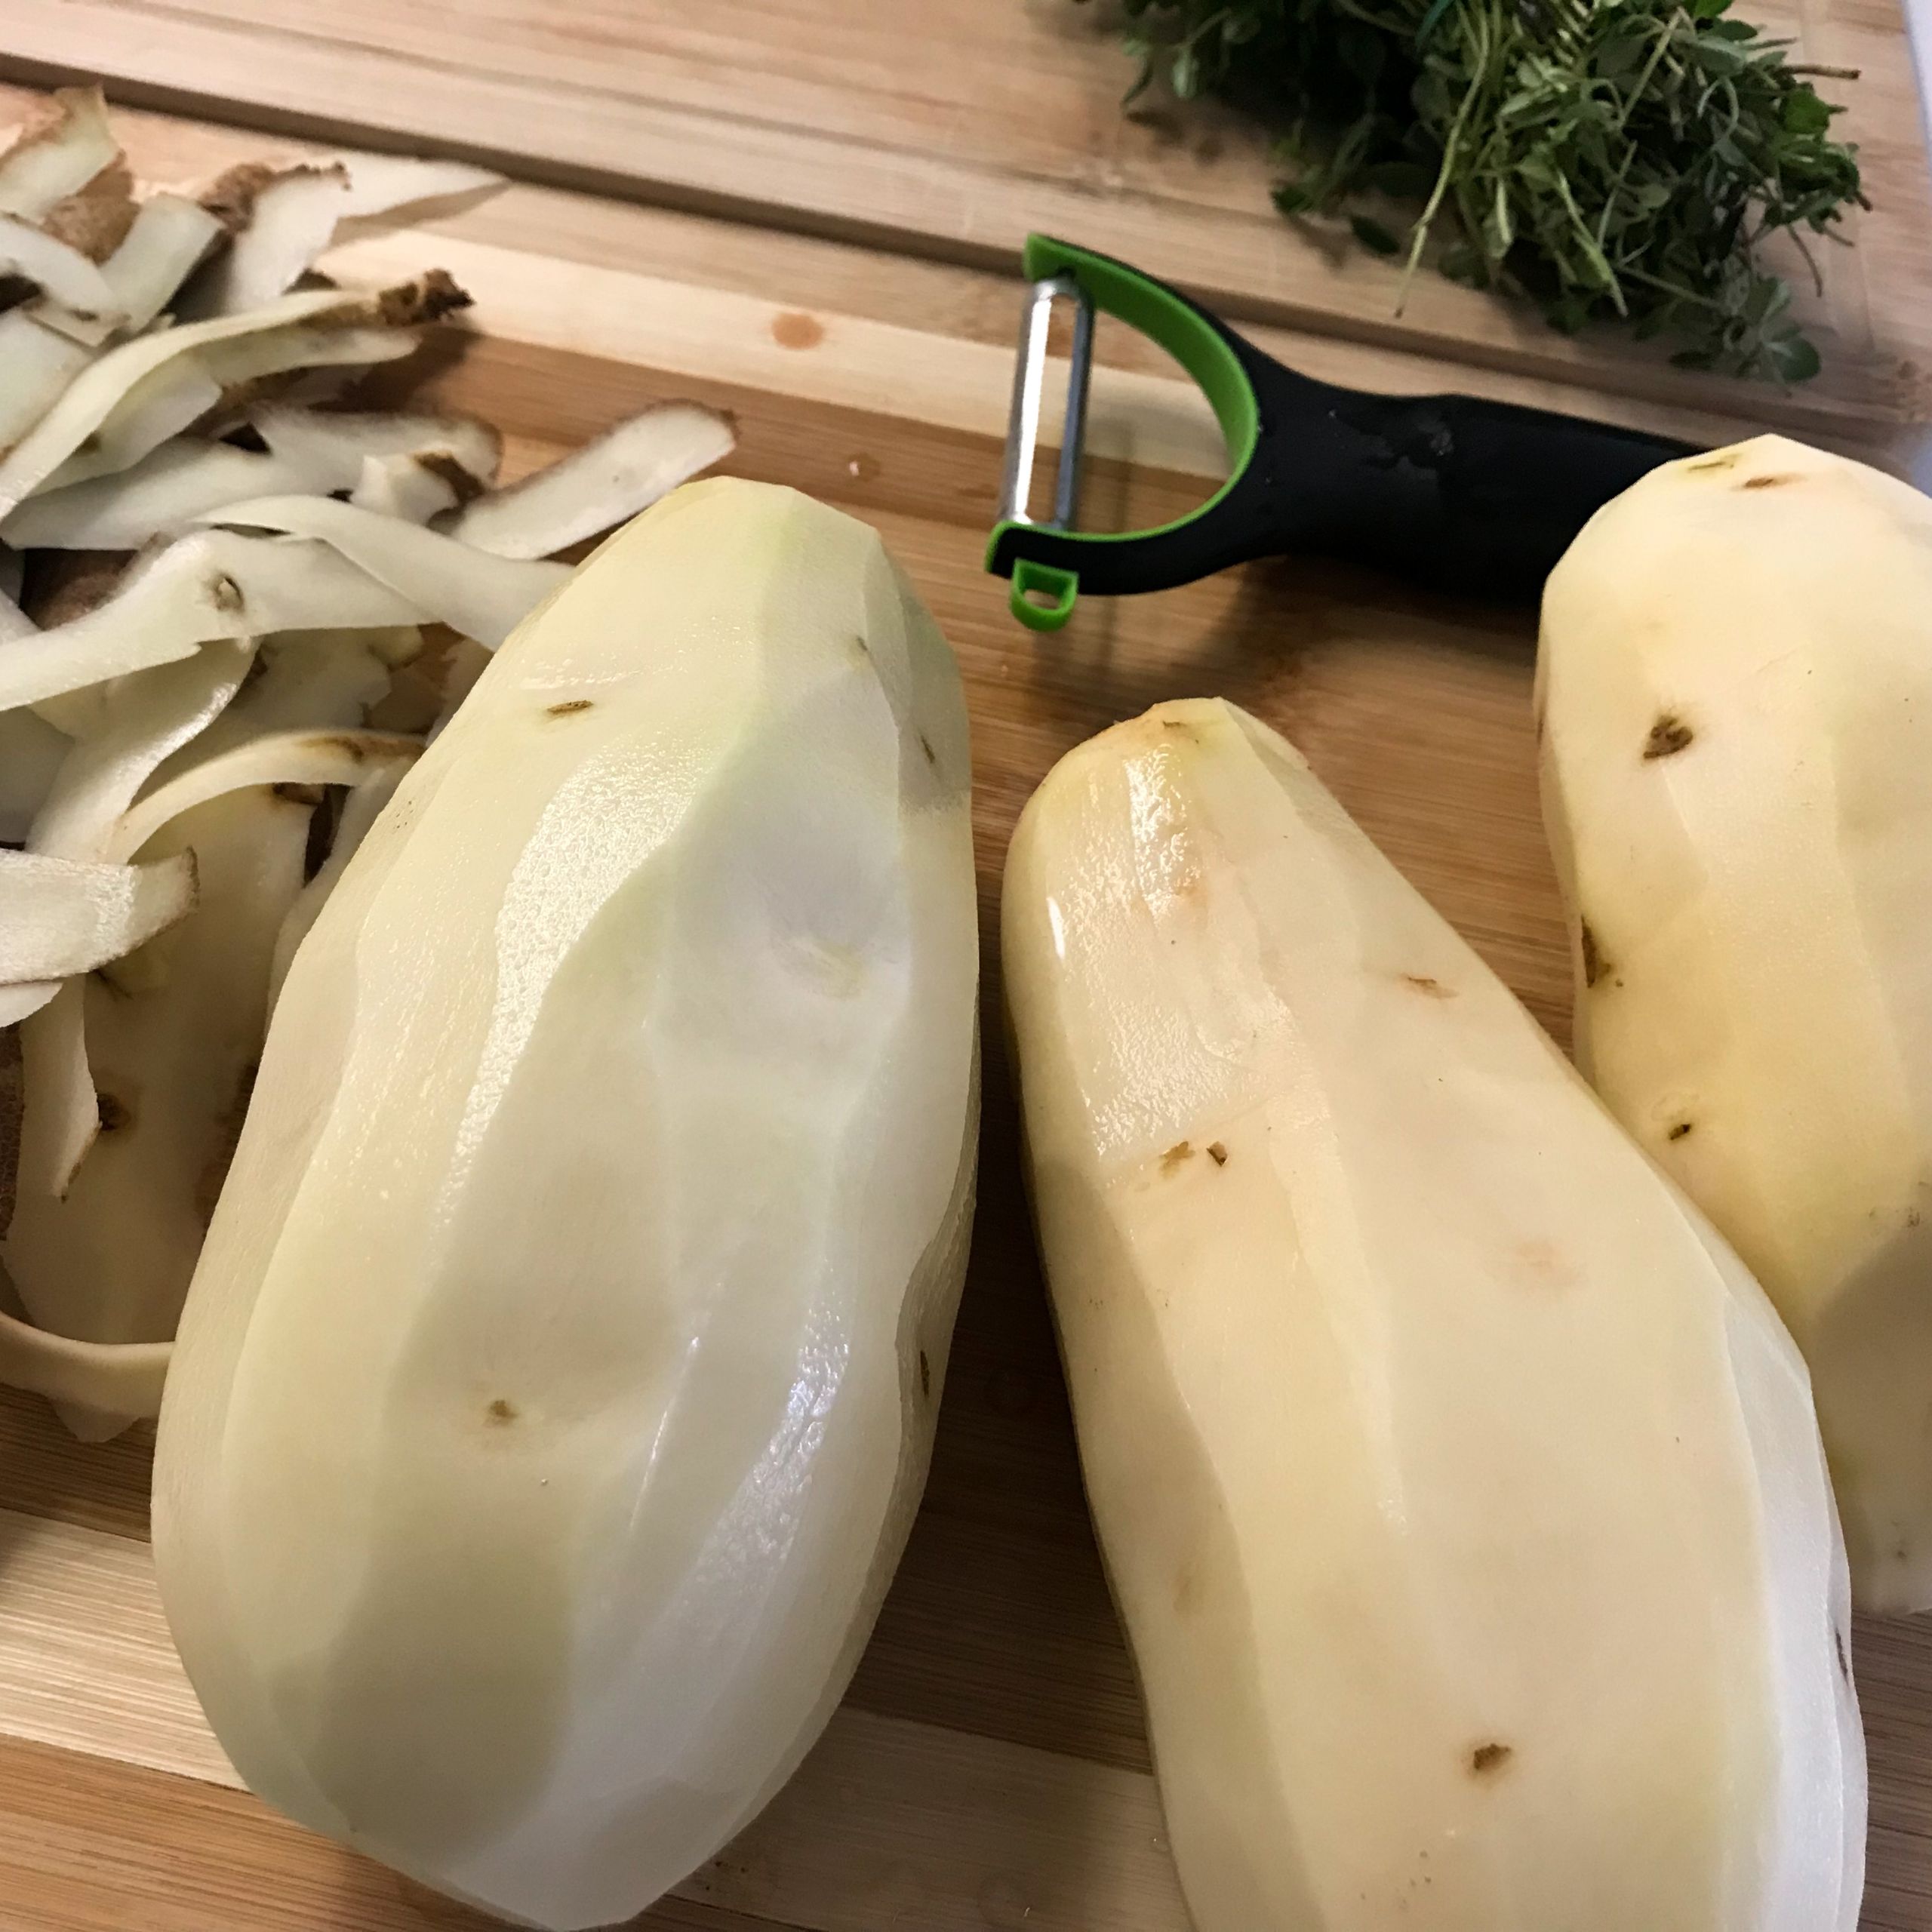 peeled potatoes on a board | my curated tastes